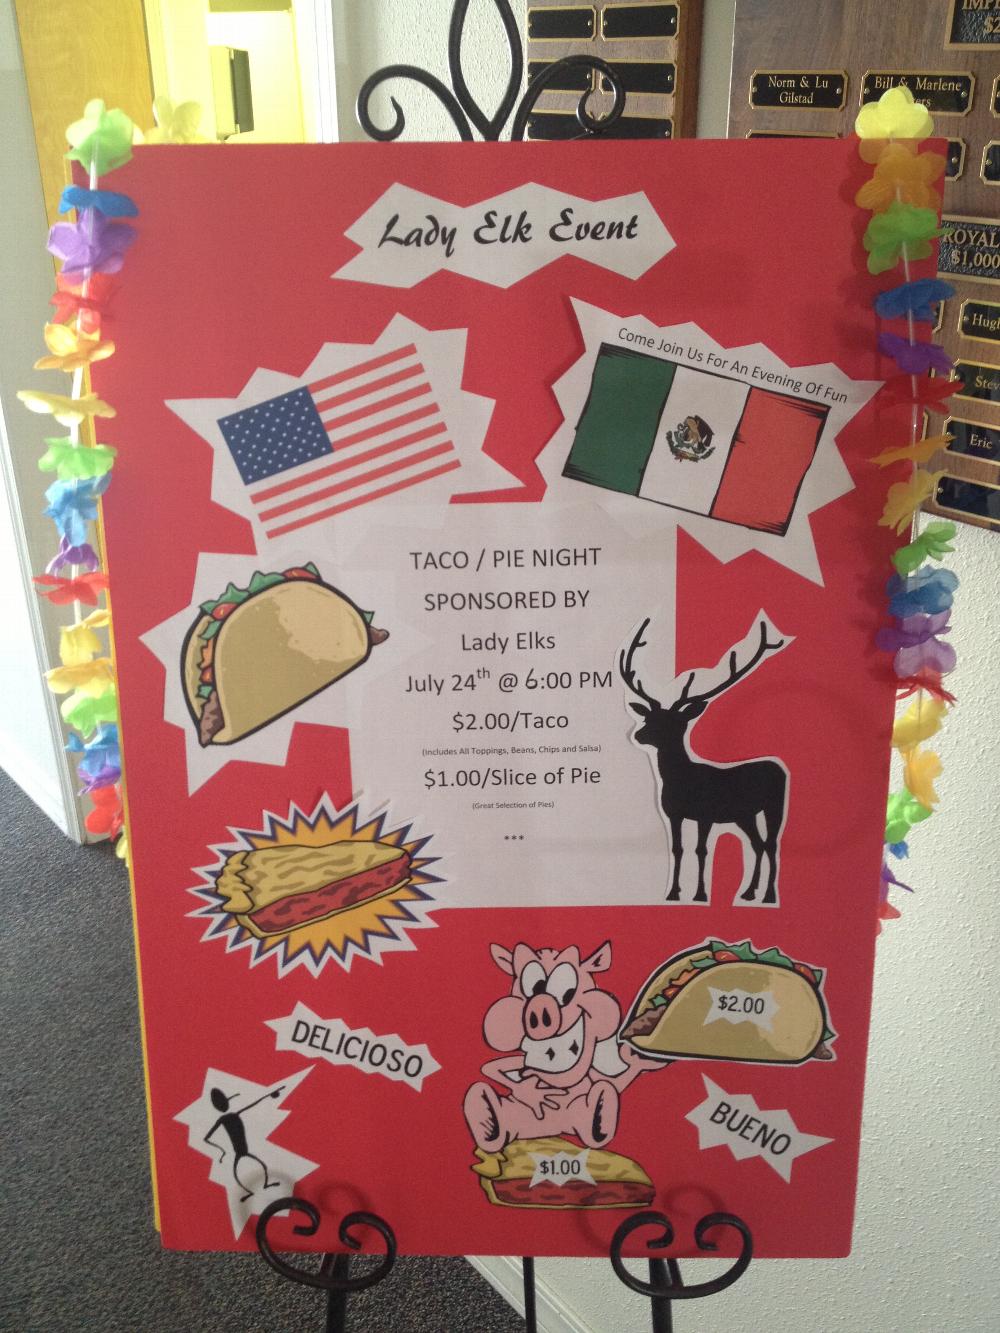 The Lady Elks sponsor a Taco Pie night every year as a fundraiser for their community projects.